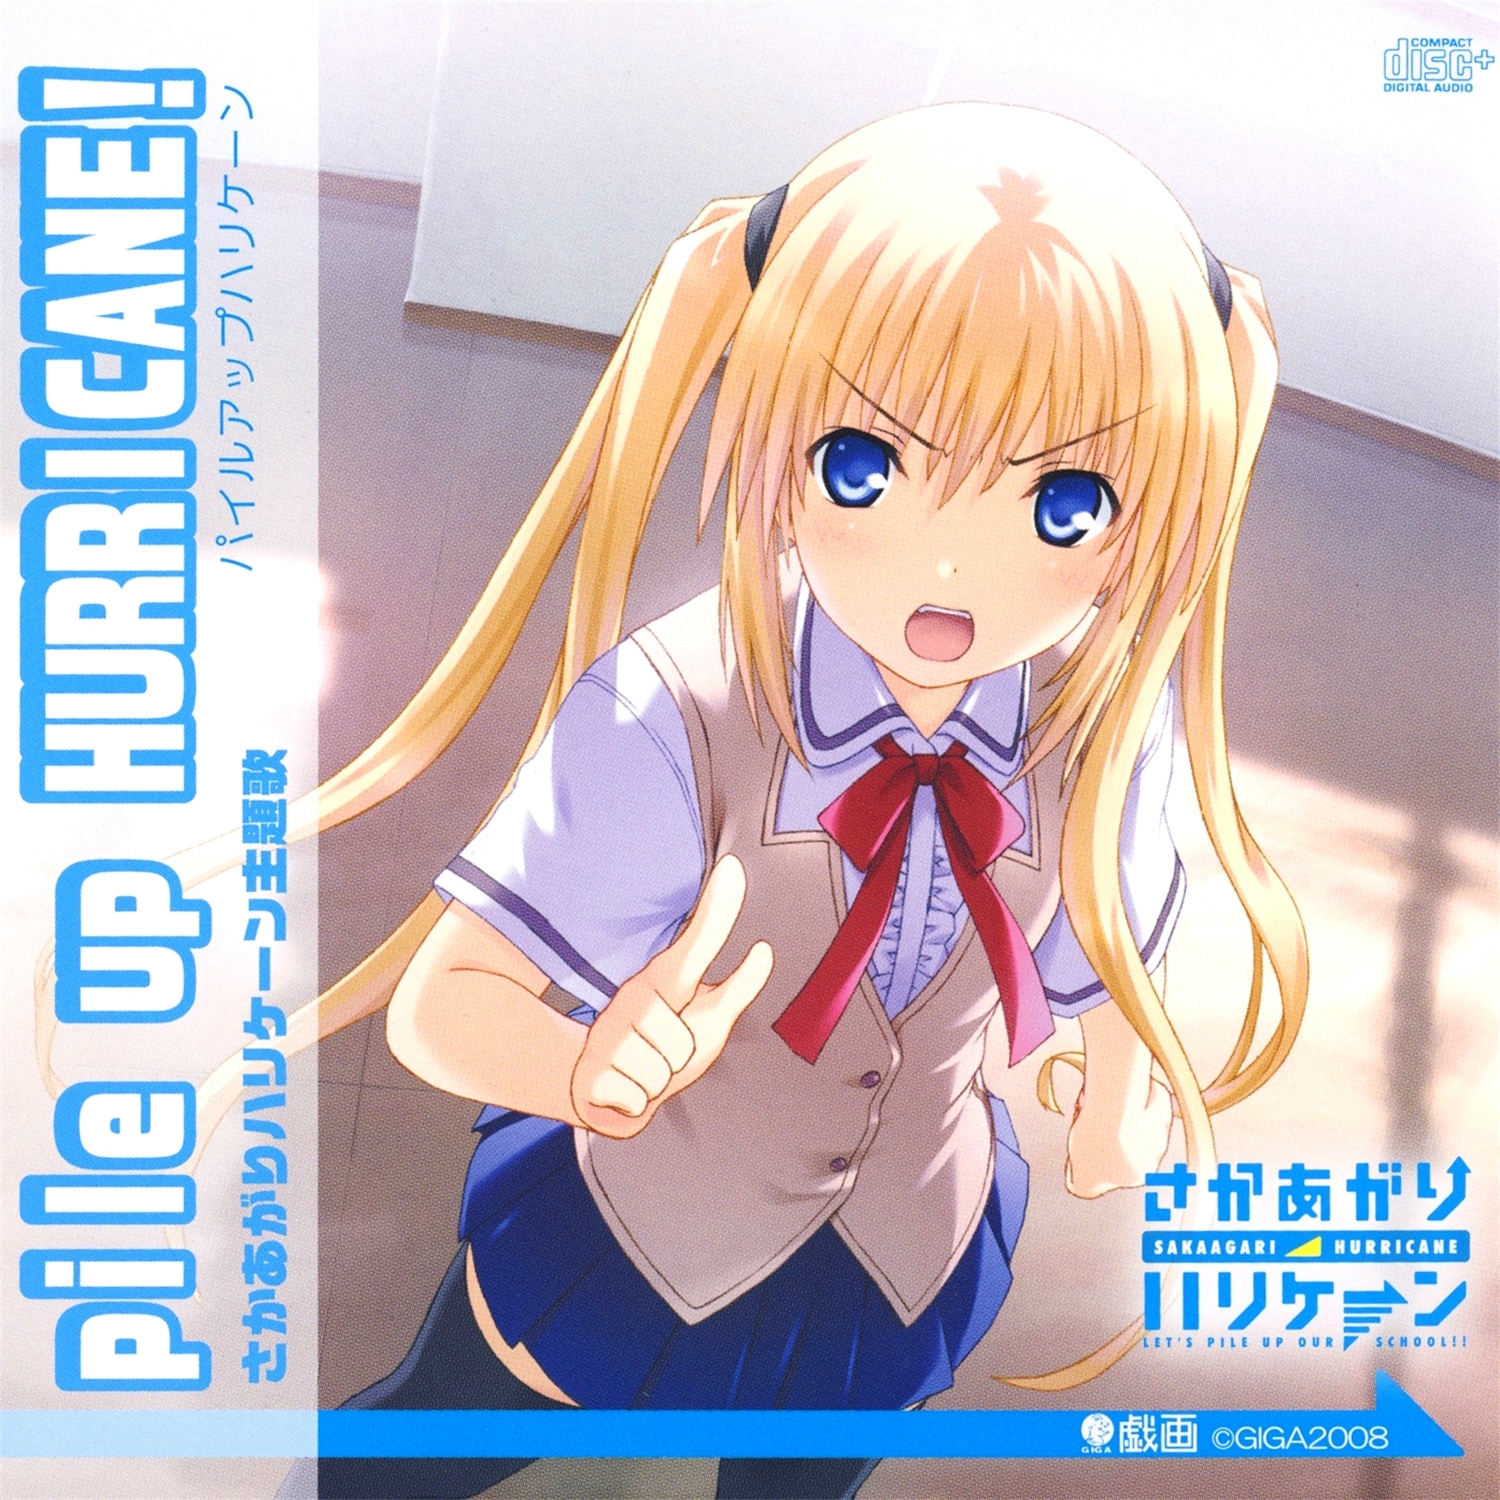 【WAV】ゲーム「さかあがりハリケーン 〜LET’S PILE UP OUR SCHOOL!〜」Theme Song「pile up HURRICANE!」／戯画